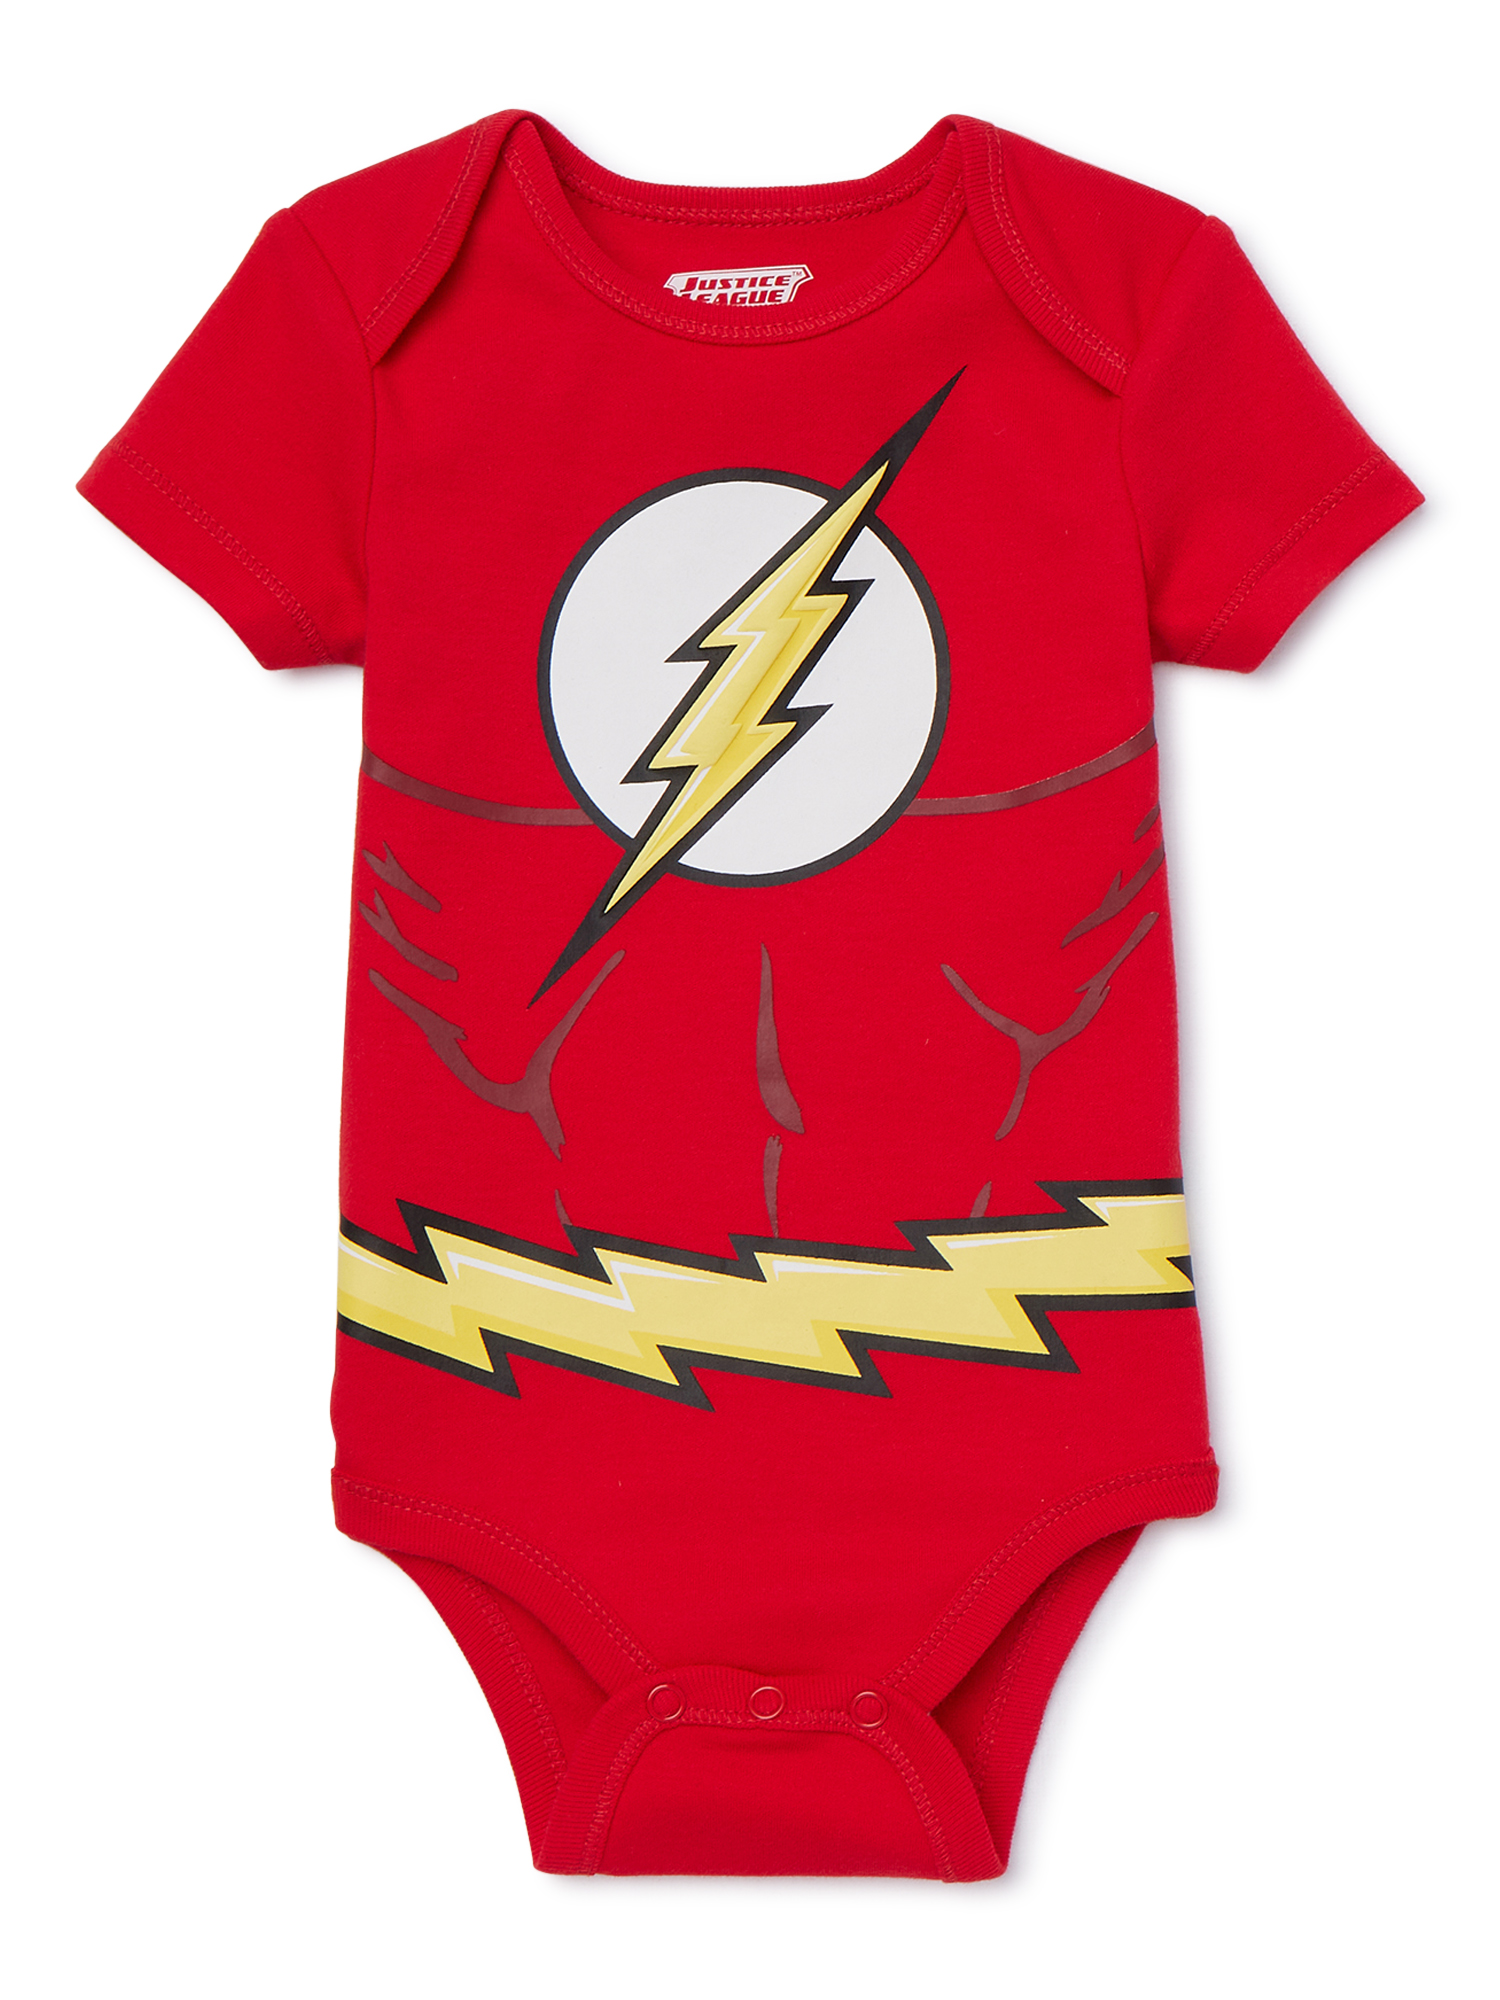 Justice League Baby Boy Short Sleeve Bodysuits, 3-Pack - image 4 of 7